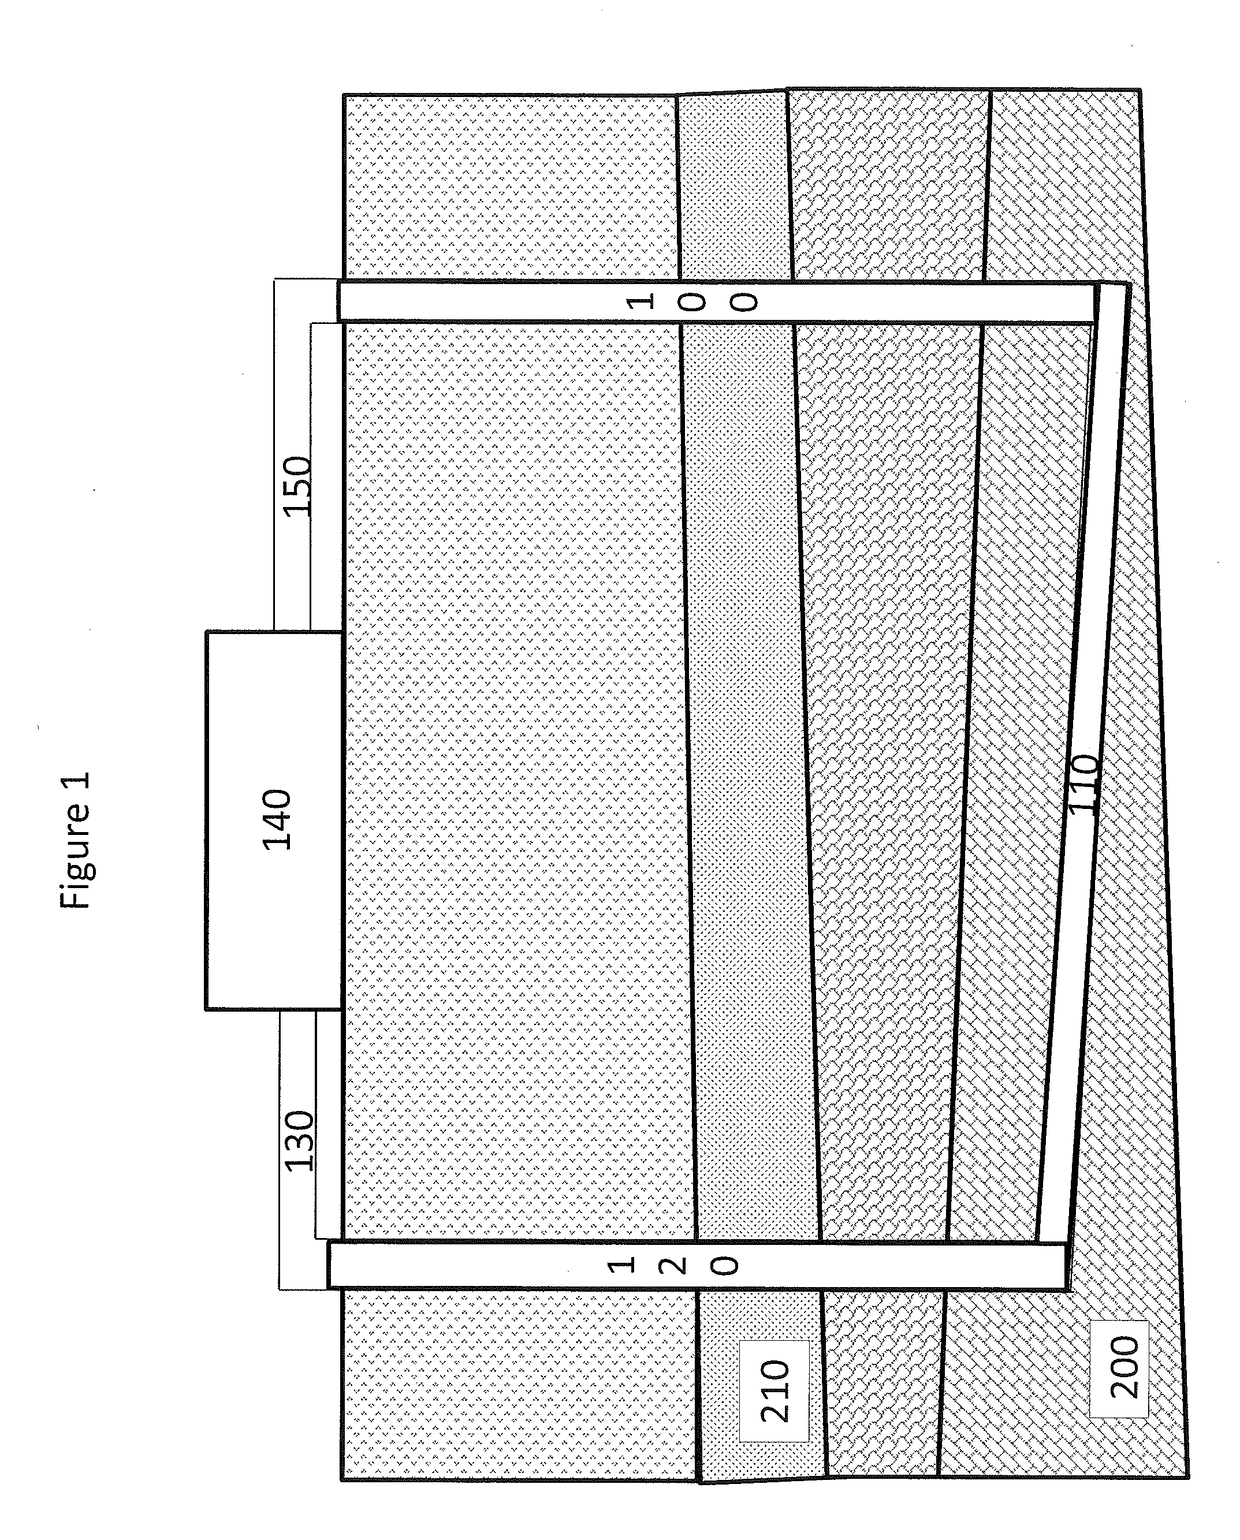 Process and method of producing geothermal power